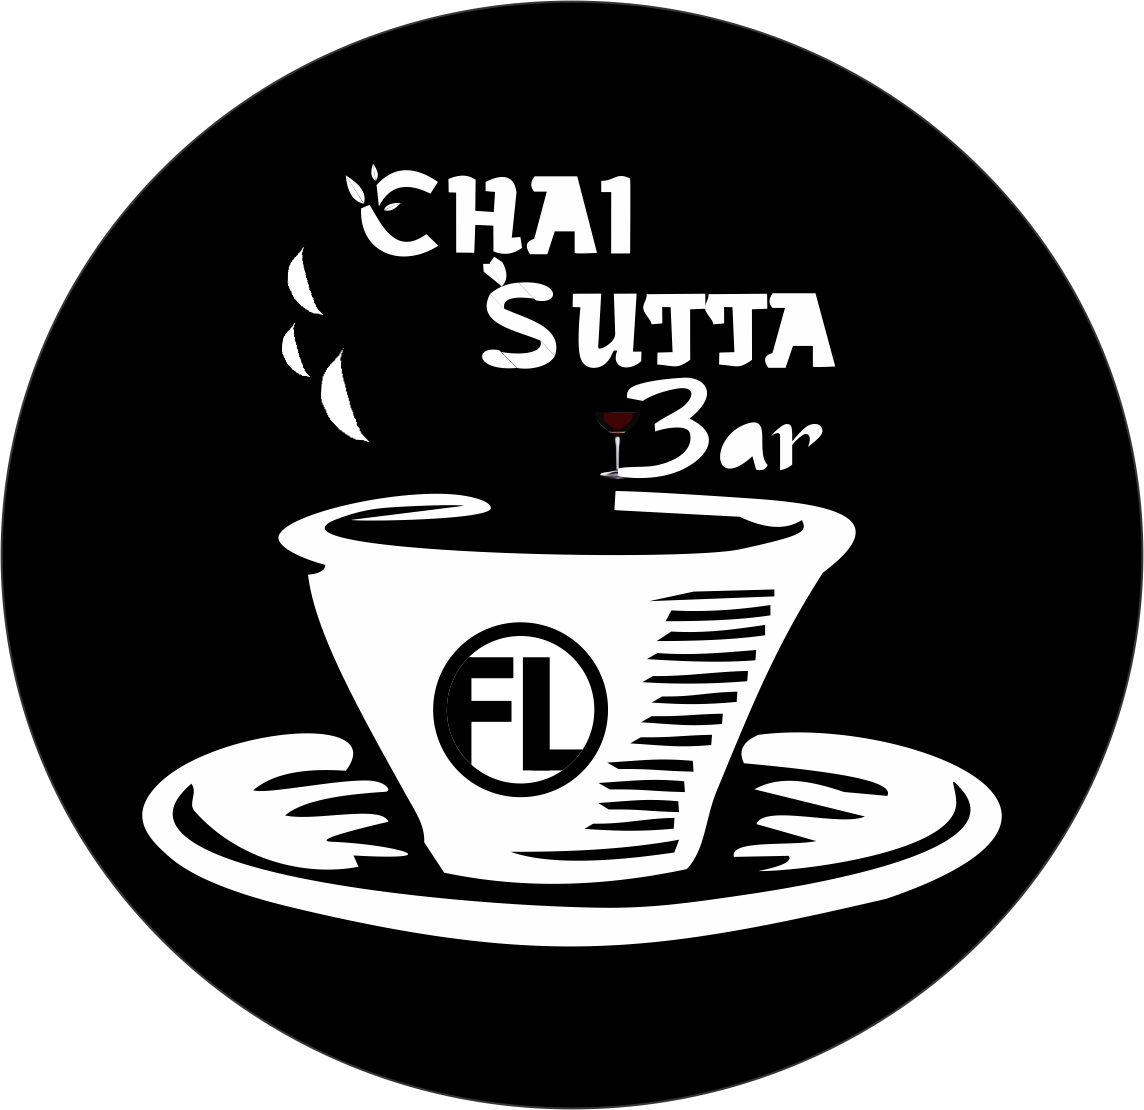 The one who loves chai should look into MBA Chaiwala, Chai Sutta.